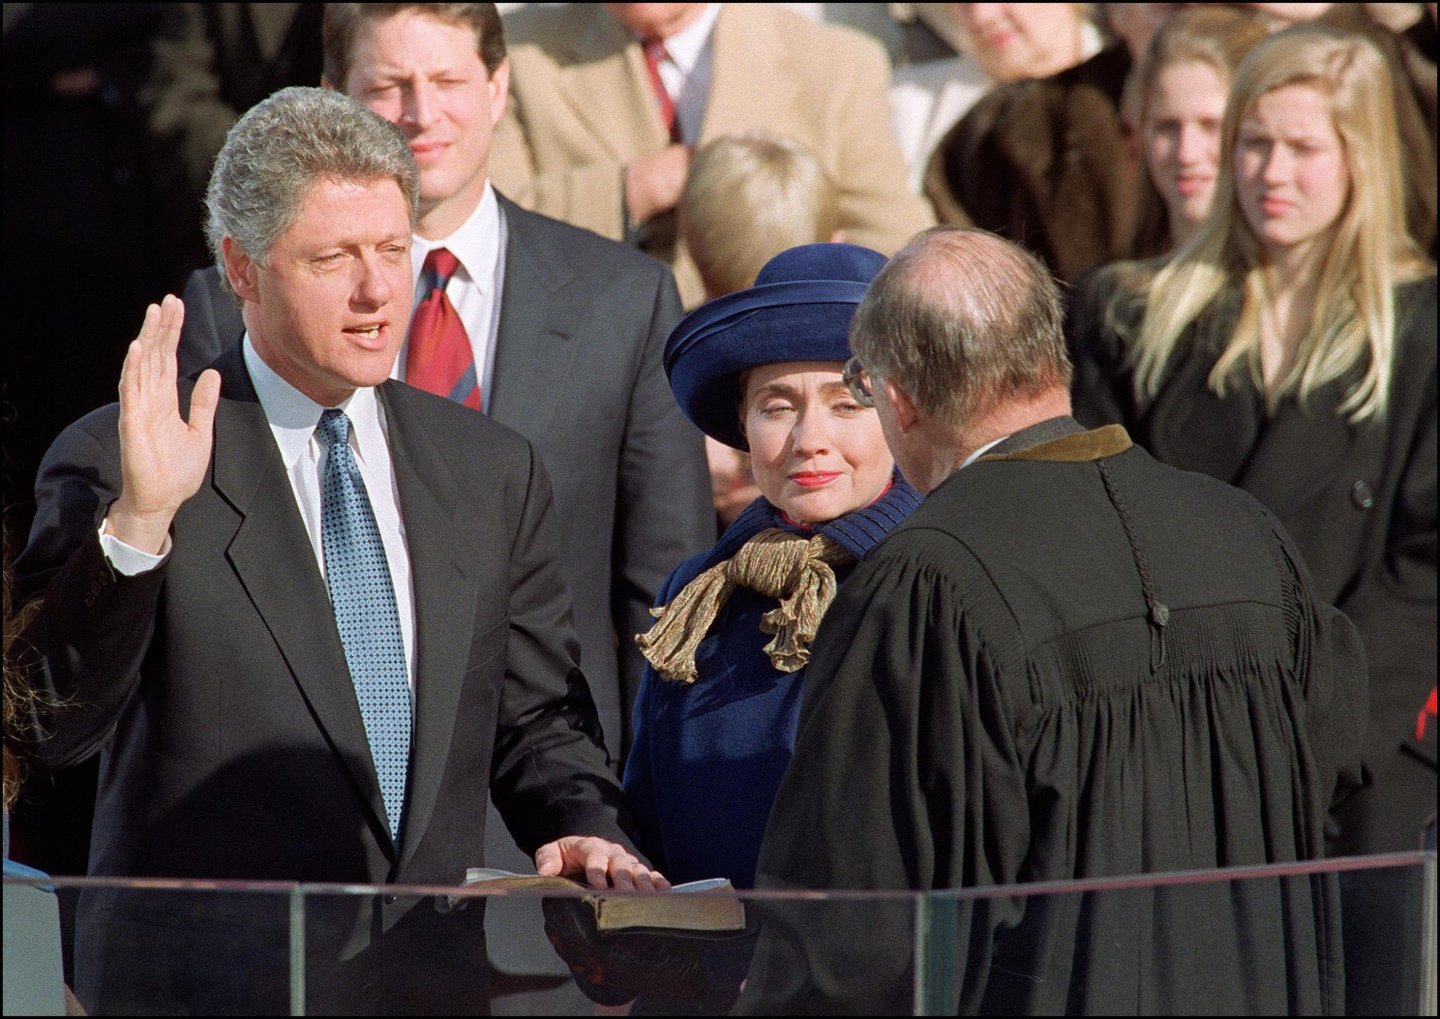 WASHINGTON, : US President William Jefferson Clinton in a picture taken 20 January 1993 in Washington, DC, takes the oath of office from Chief Justice of the Supreme Court William Rehnquist to become the 42nd President of the US as his wife Hillary Rodham Clinton looks on. (Photo credit should read TIM CLARY/AFP/Getty Images)